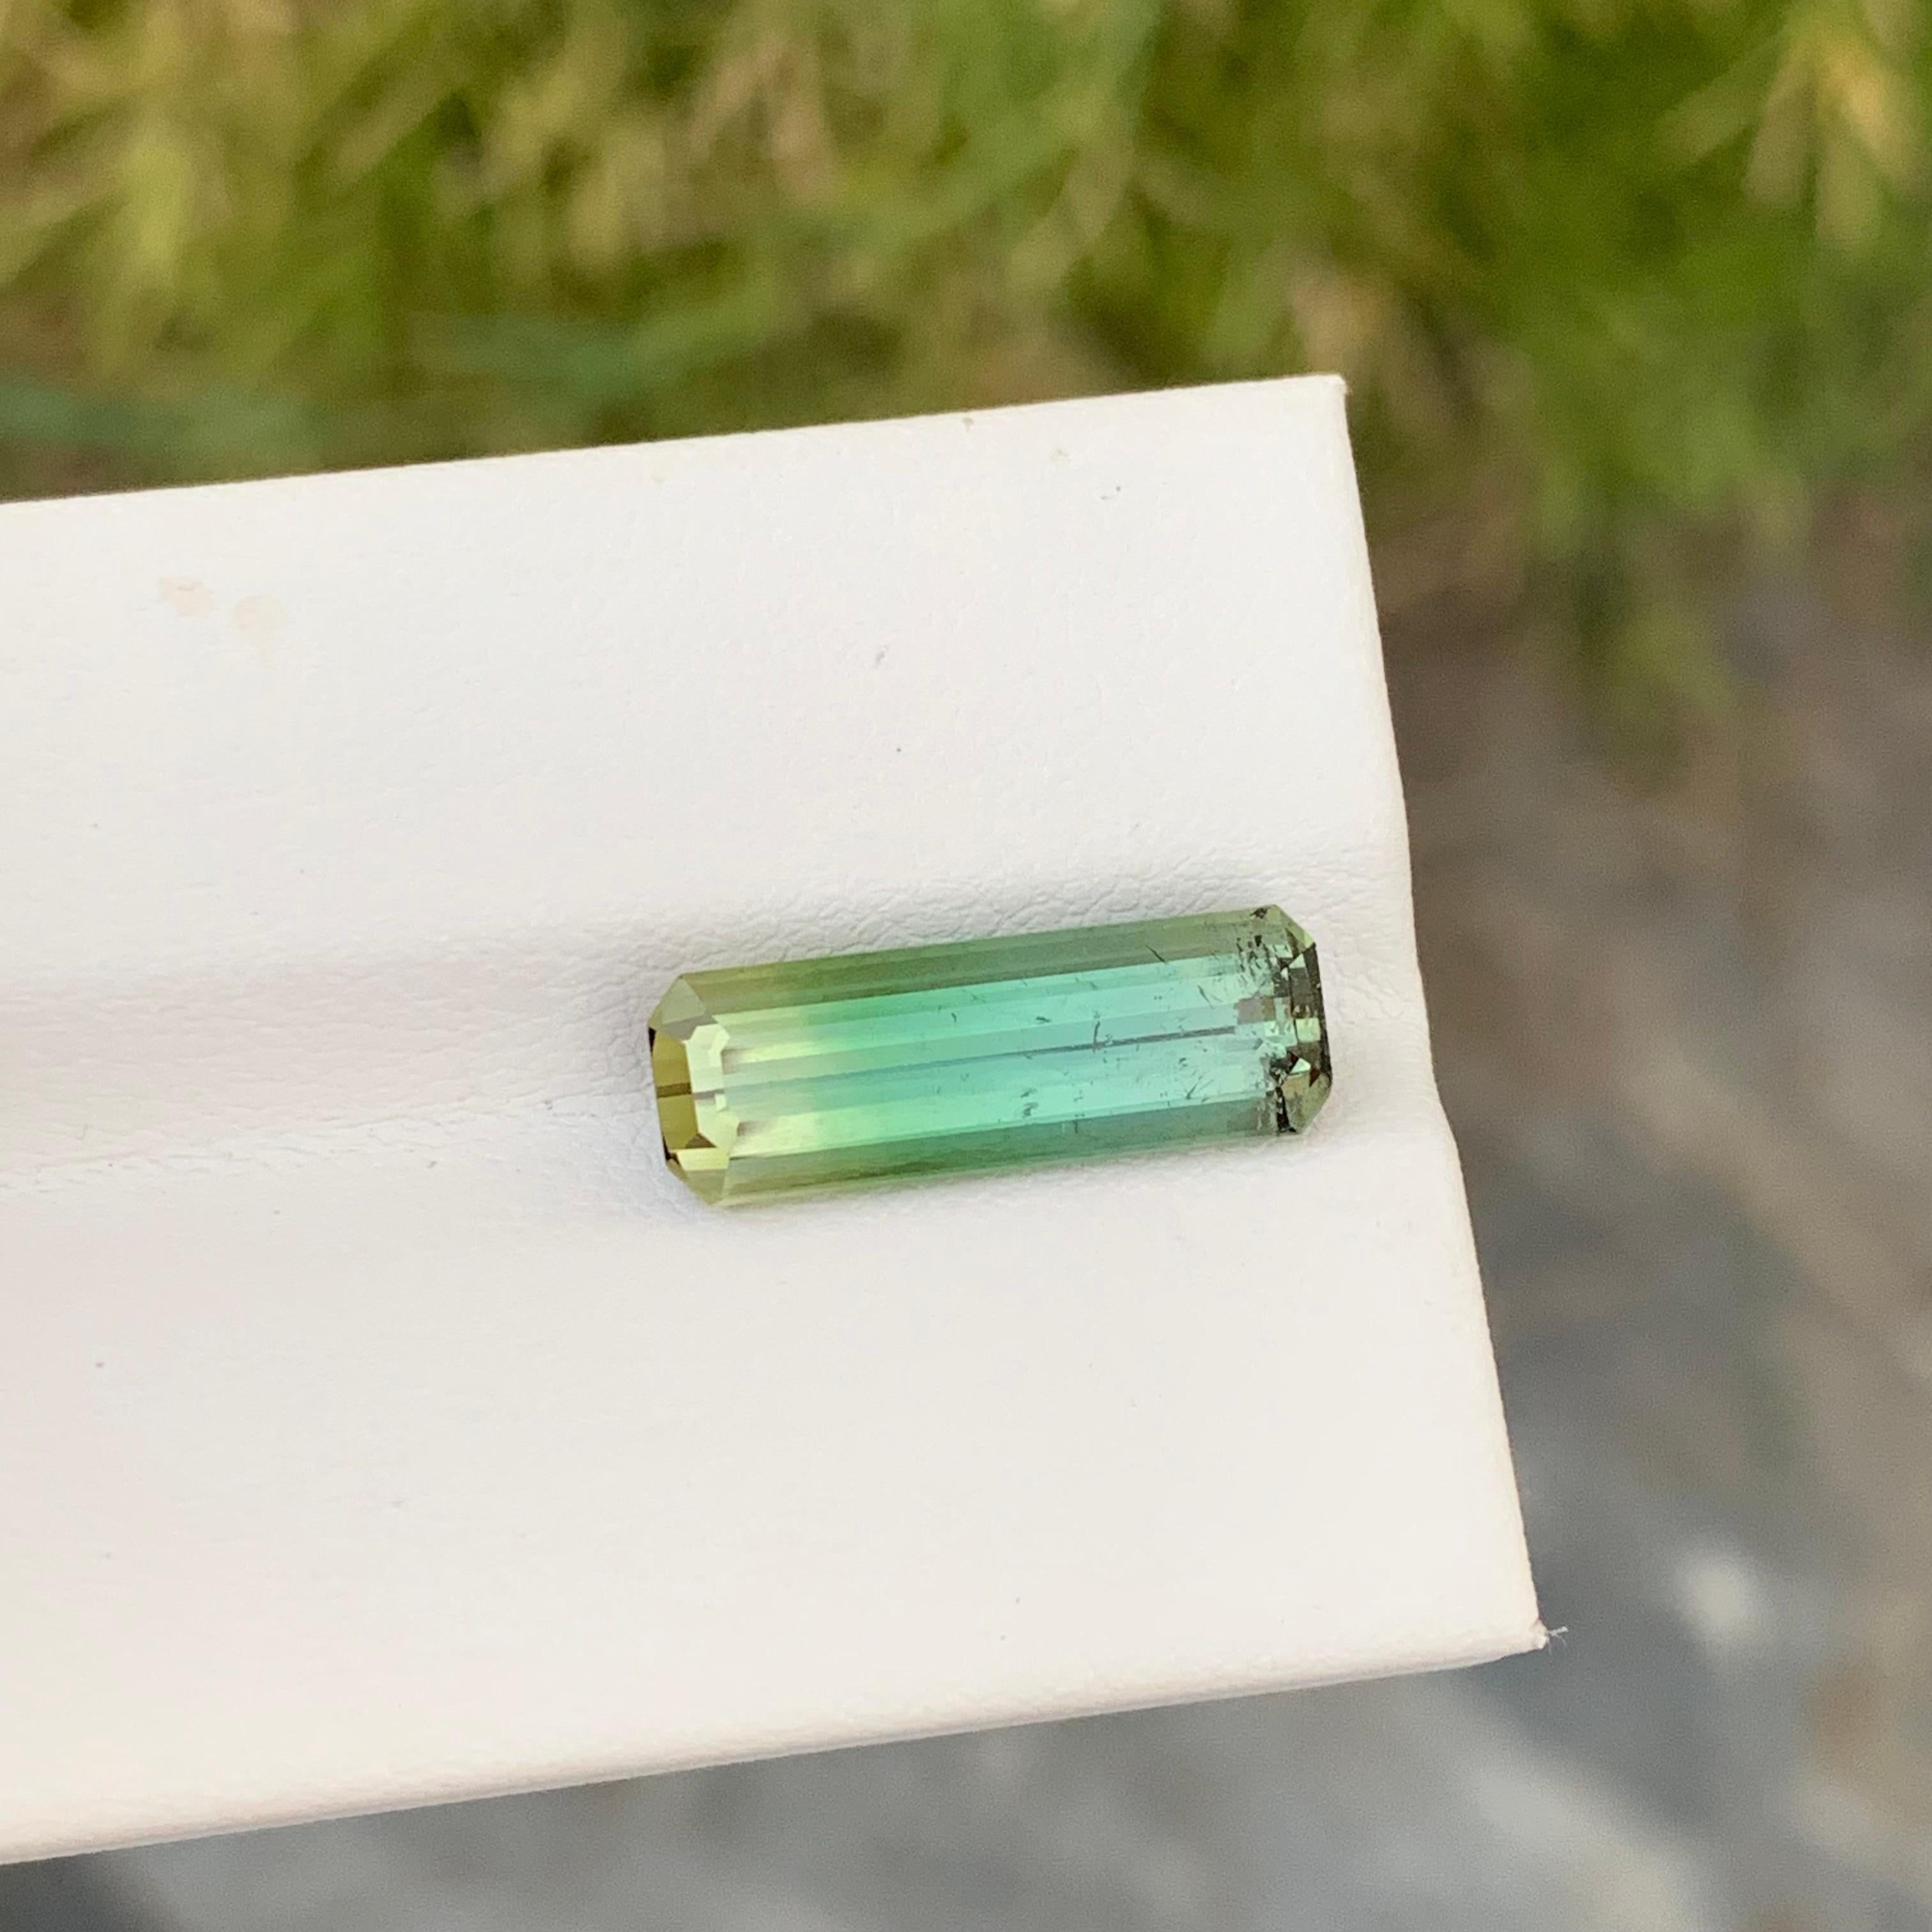 Loose Bi Colour Tourmaline

Weight: 4.85 Carats
Dimension: 17.3 x 6 x 5.1 Mm
Colour: Green And Yellow
Origin: Africa
Certificate: On Demand
Treatment: Non

Tourmaline is a captivating gemstone known for its remarkable variety of colors, making it a